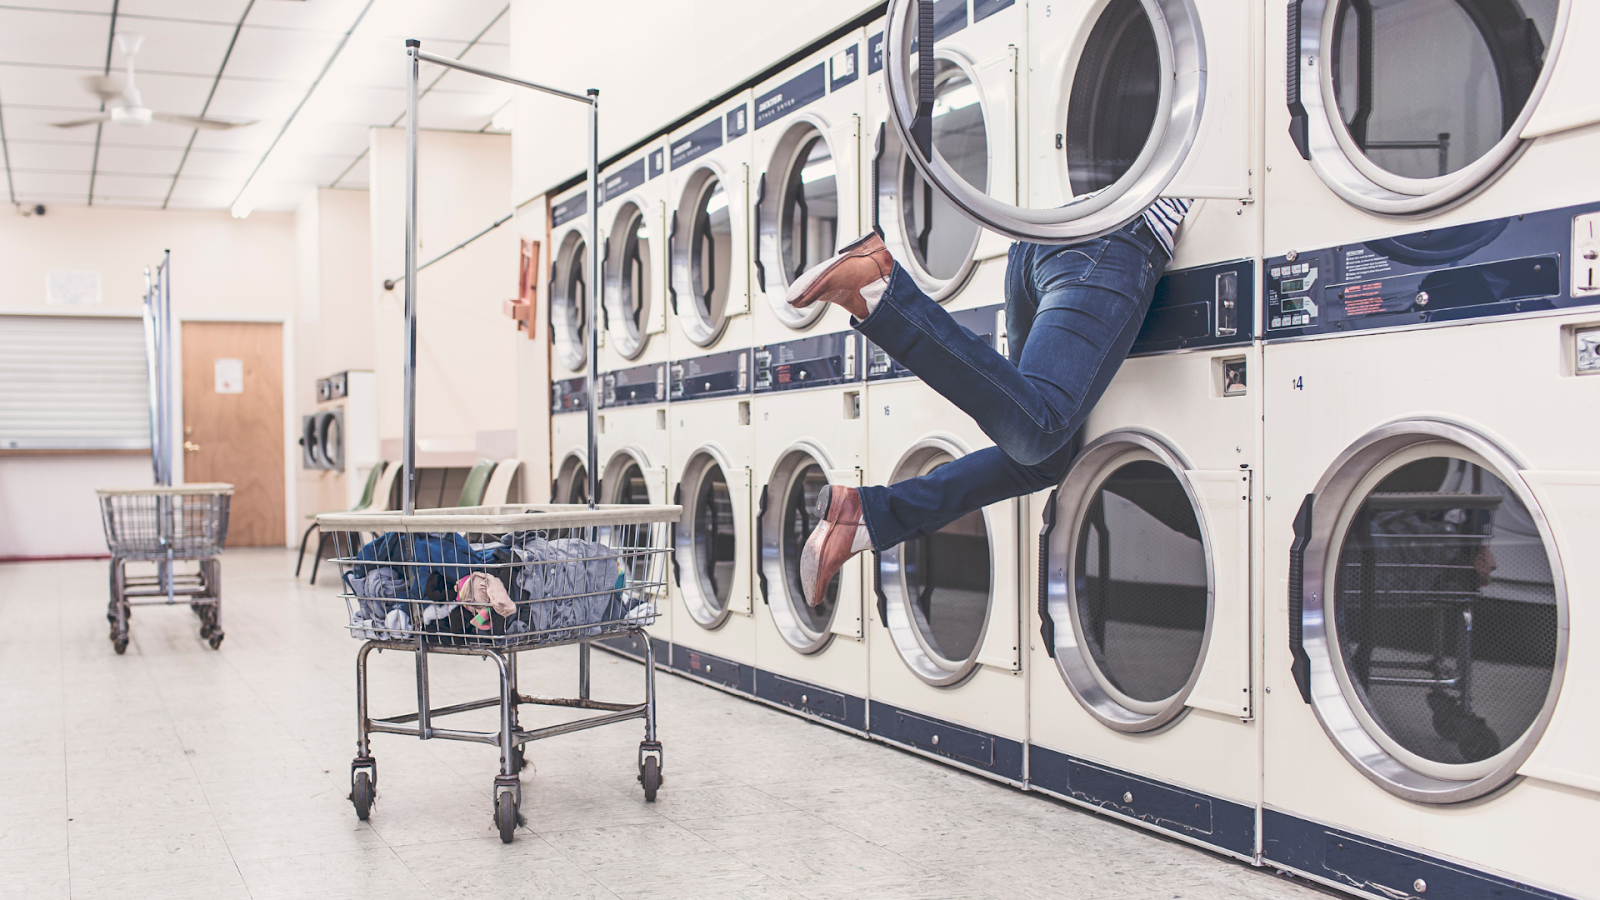 Common problems with dryers in Canada
